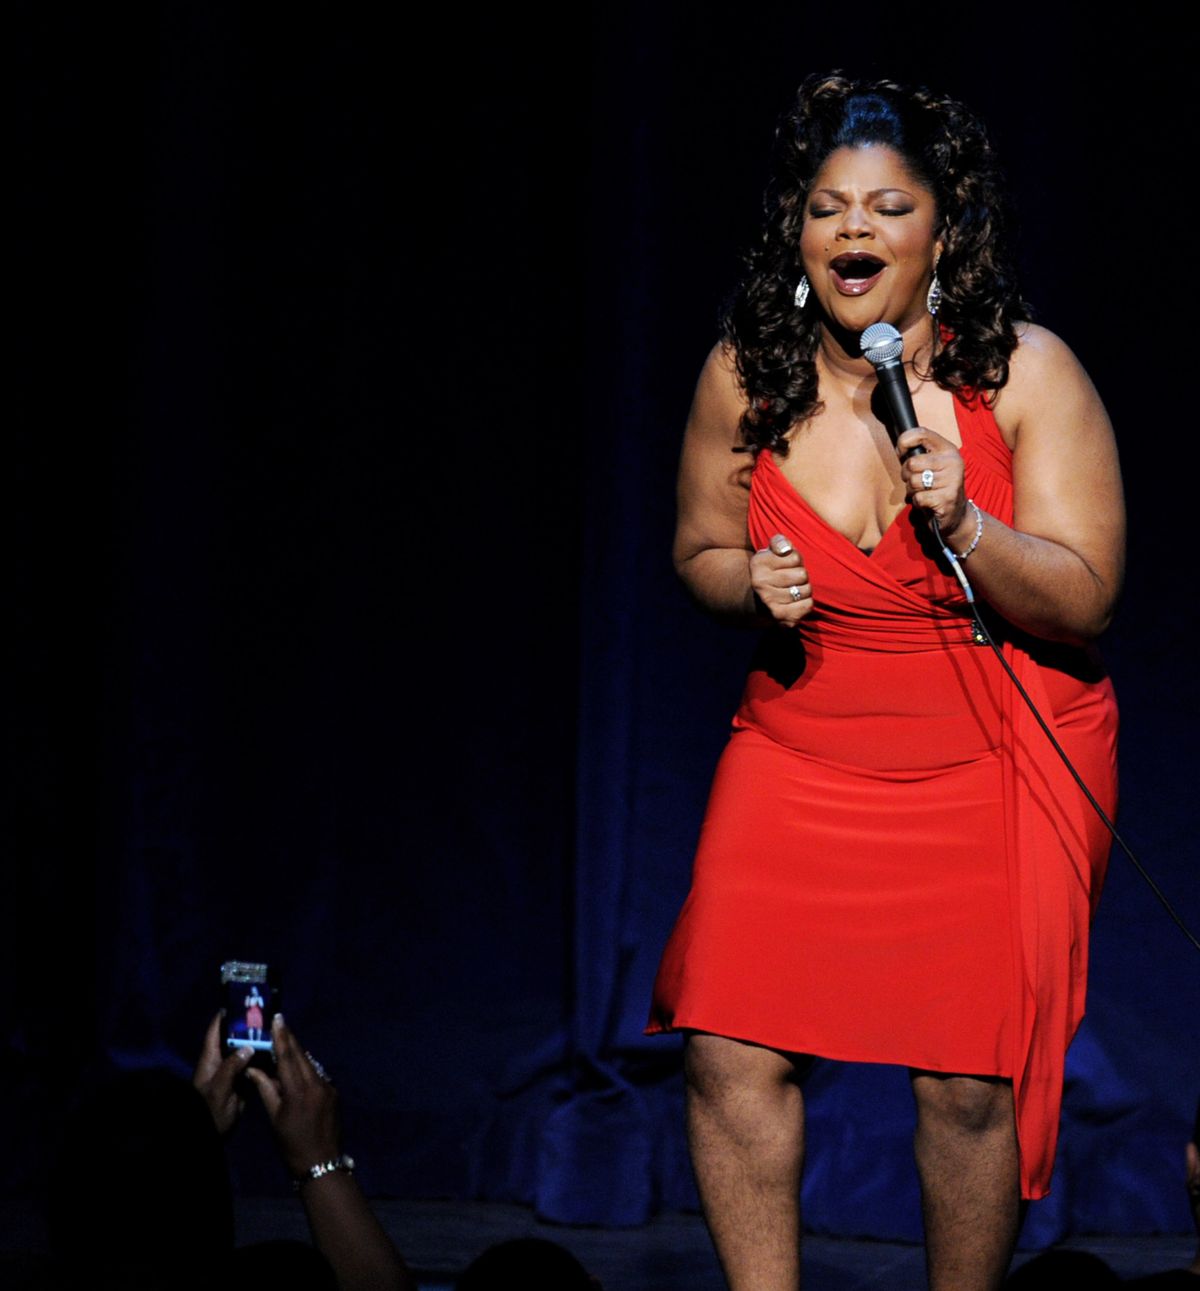 Actress/comedienne Mo'Nique performs during her "Spread The Love" comedy tour at the Nokia Theater on April 2, 2010 in Los Angeles, California. (Kevin Winter)